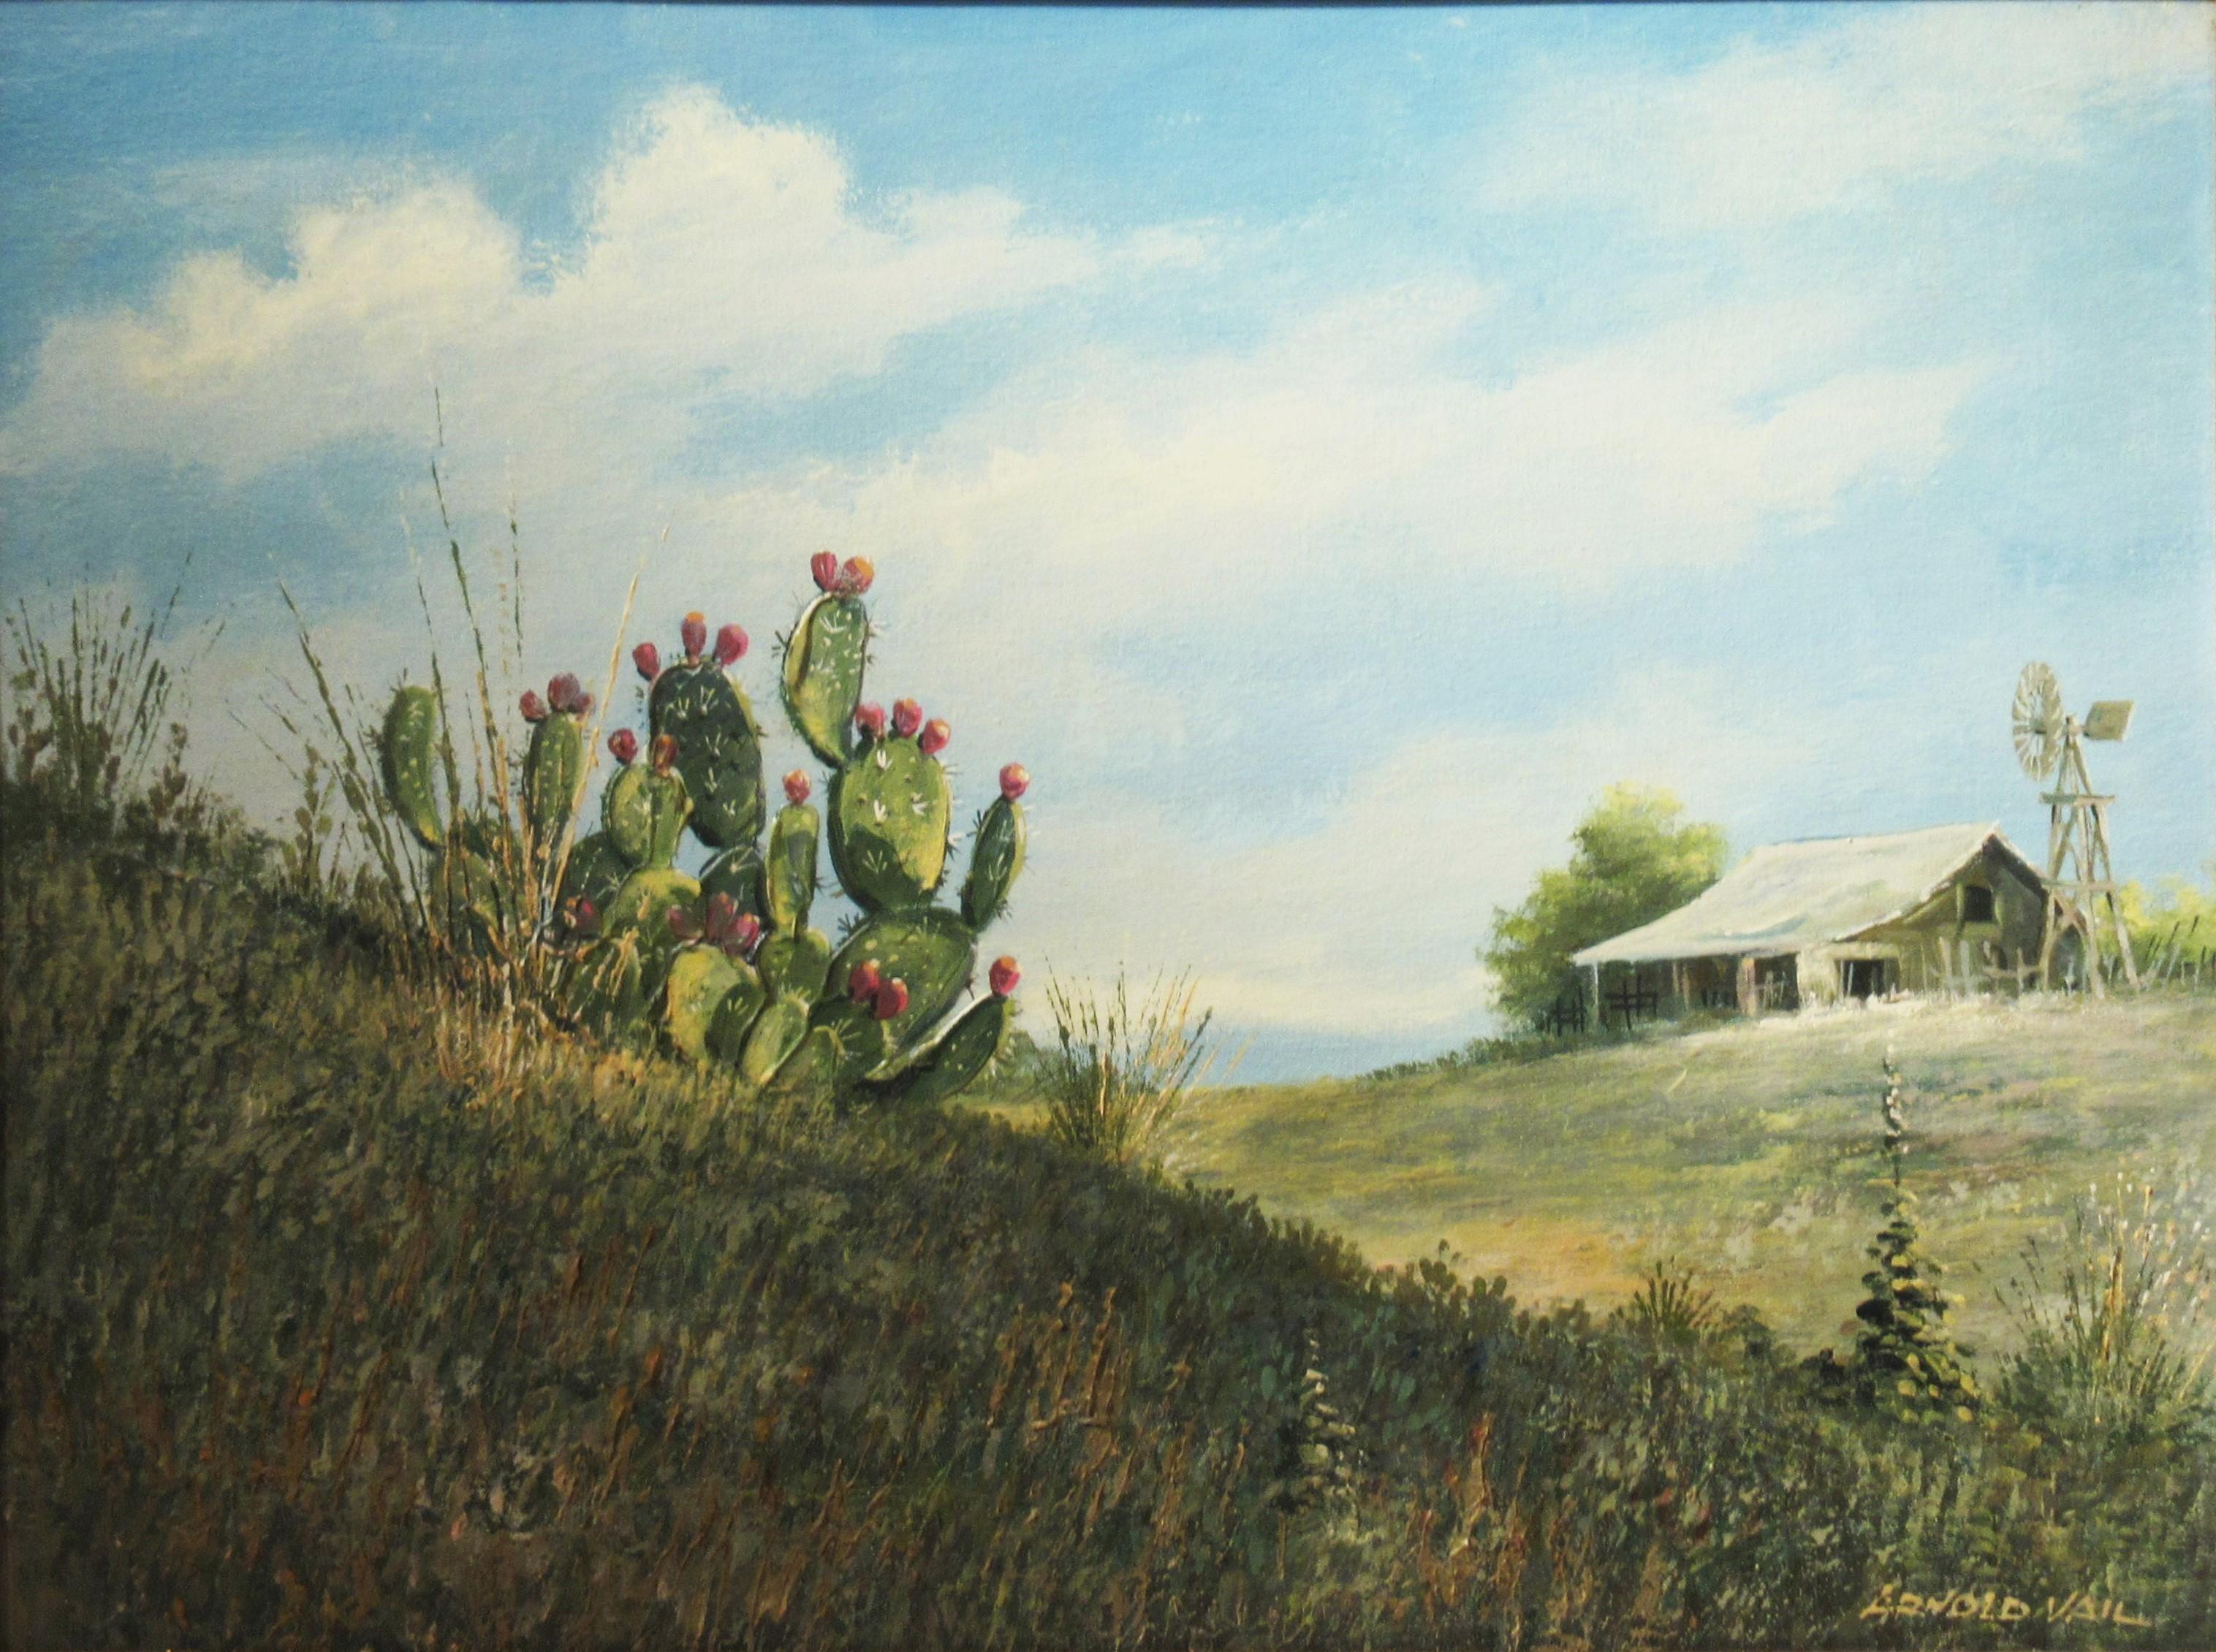 Texas Landscape with Cactus - Painting by Arnold Vail